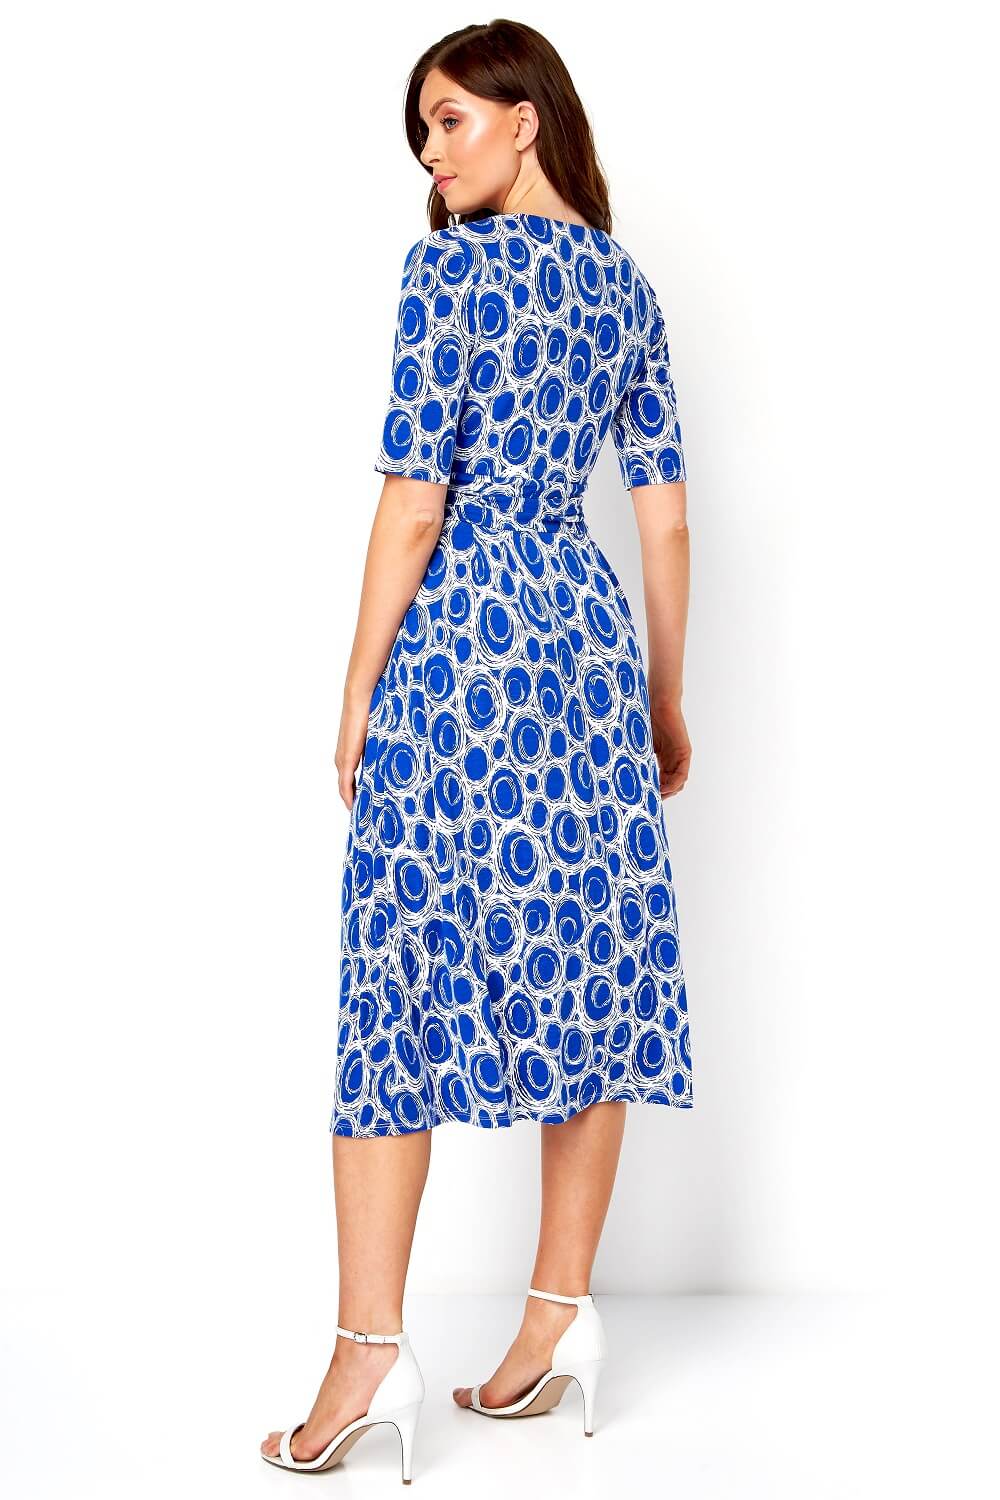 Royal Blue Spot Printed Fit and Flare Dress, Image 3 of 5